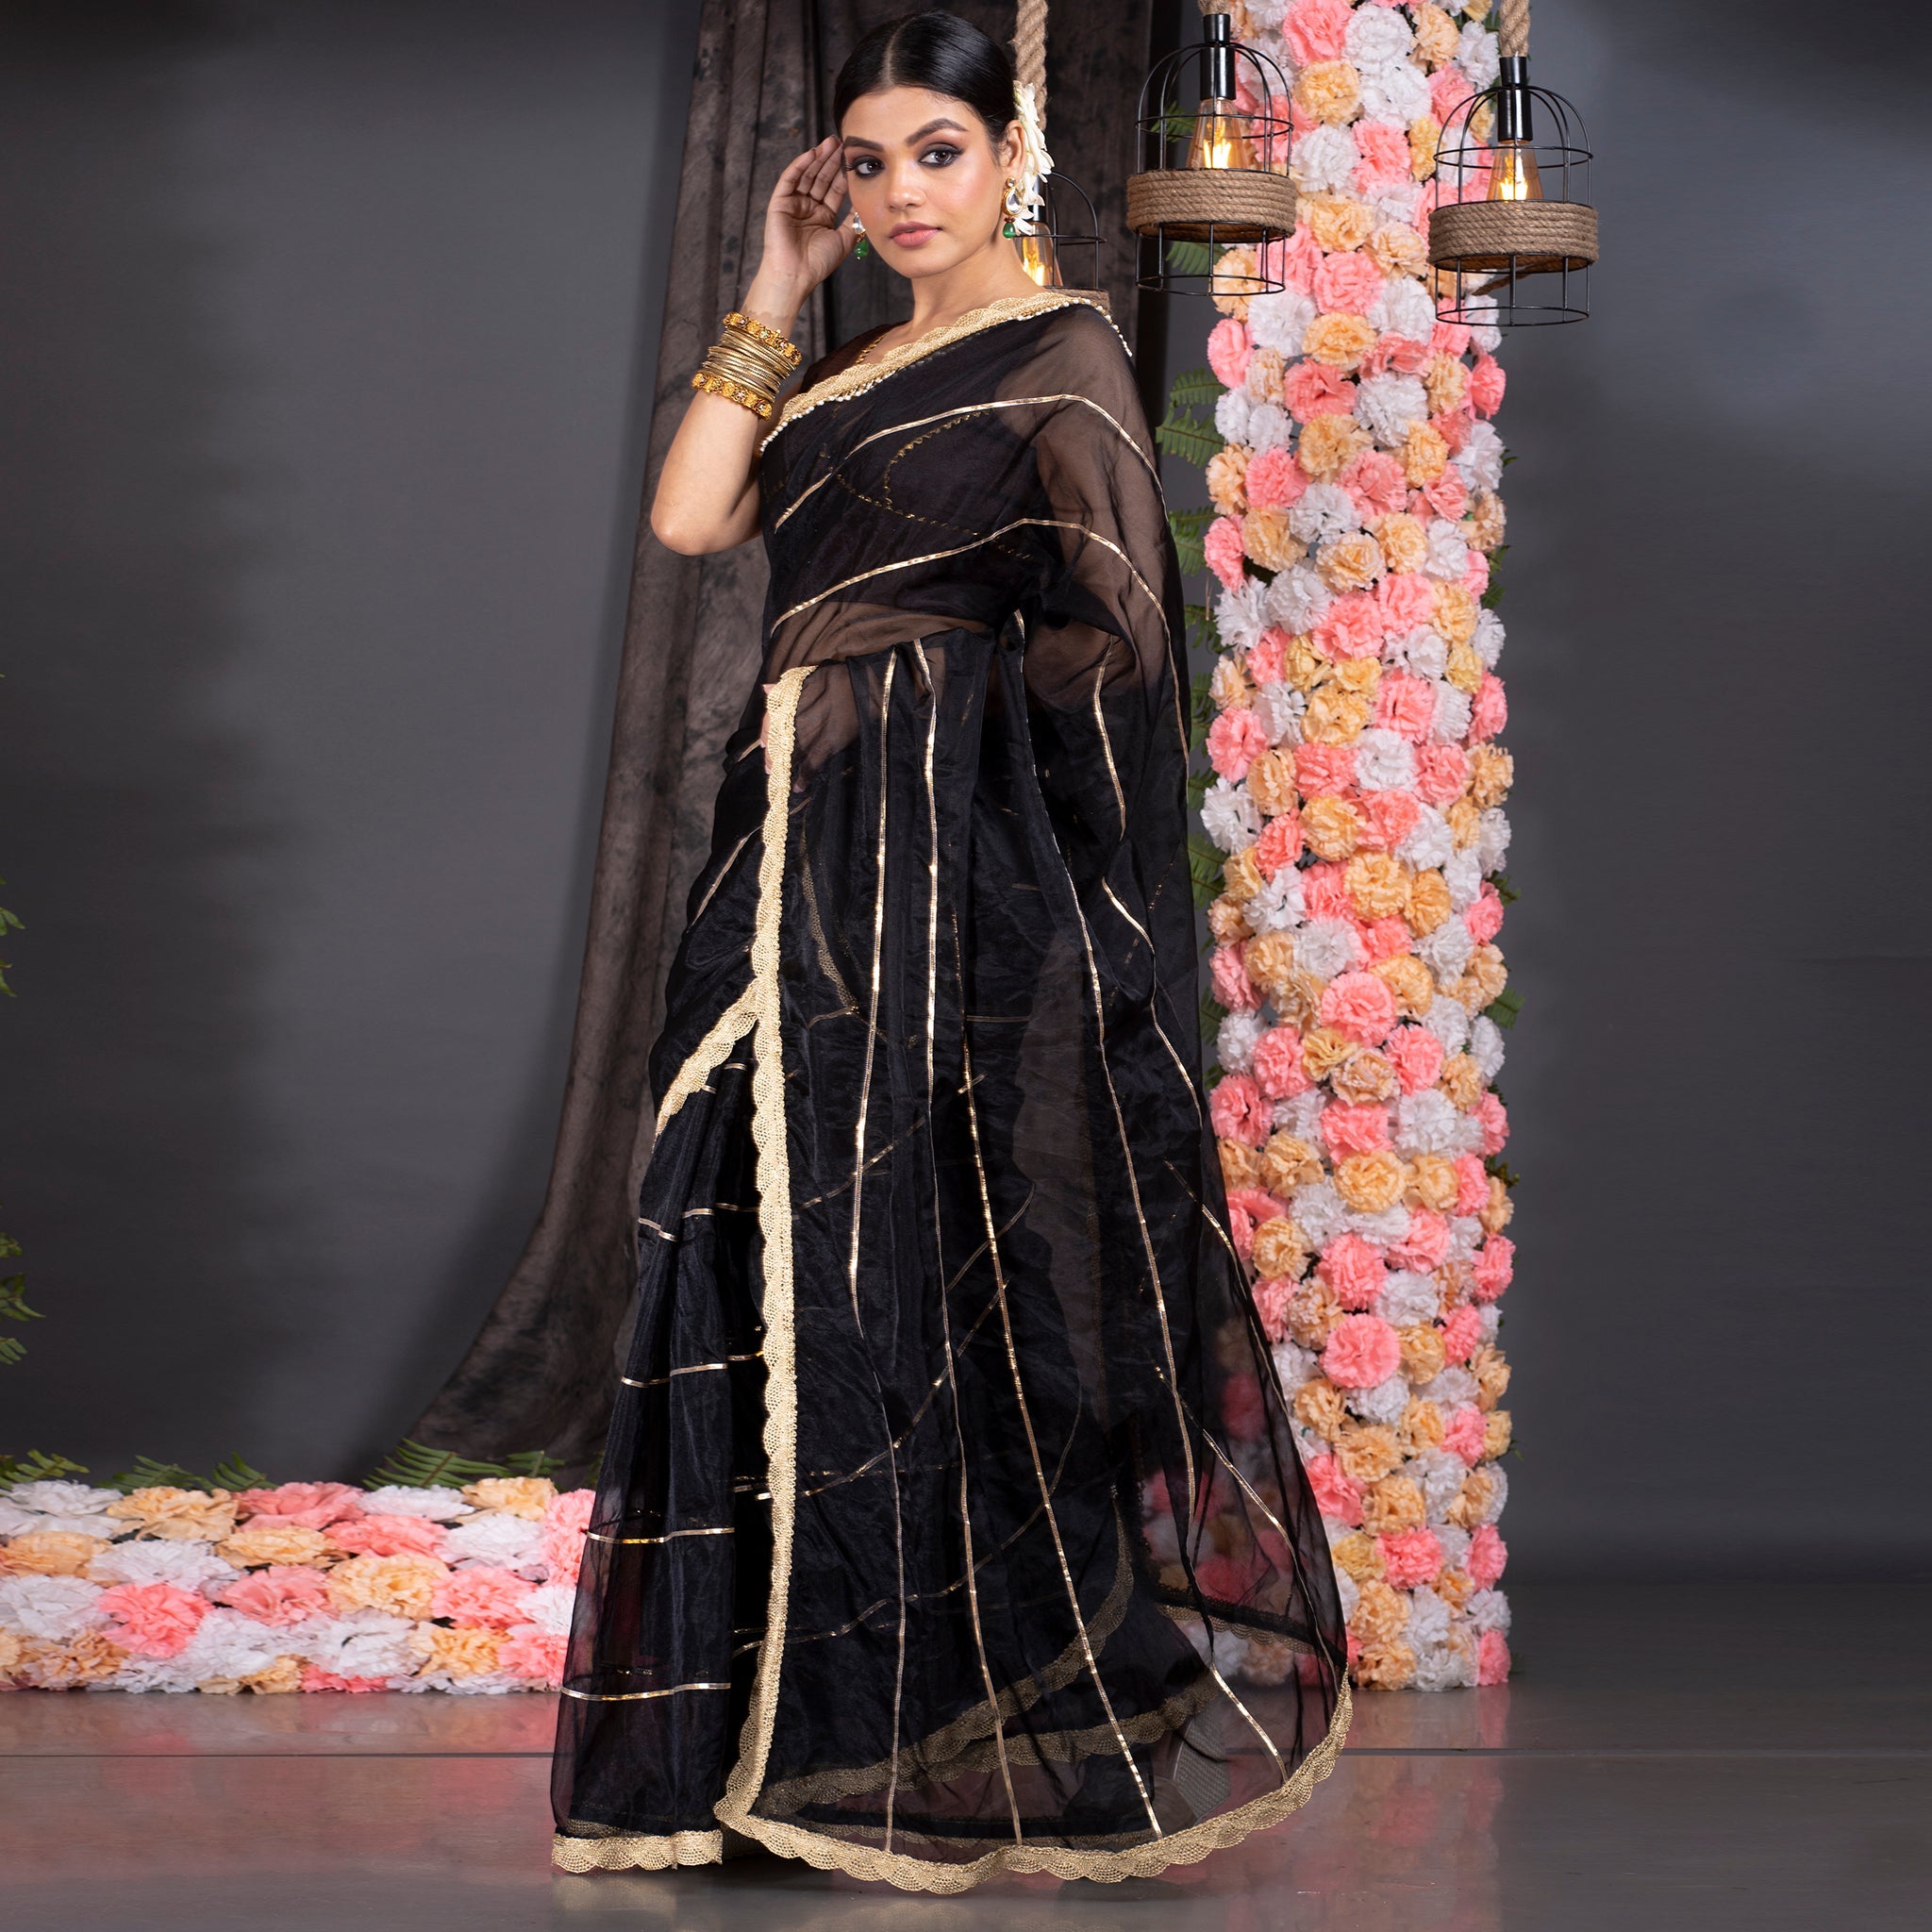 Women's Black Organza Saree With Gota Work And Scallop Border - Boveee